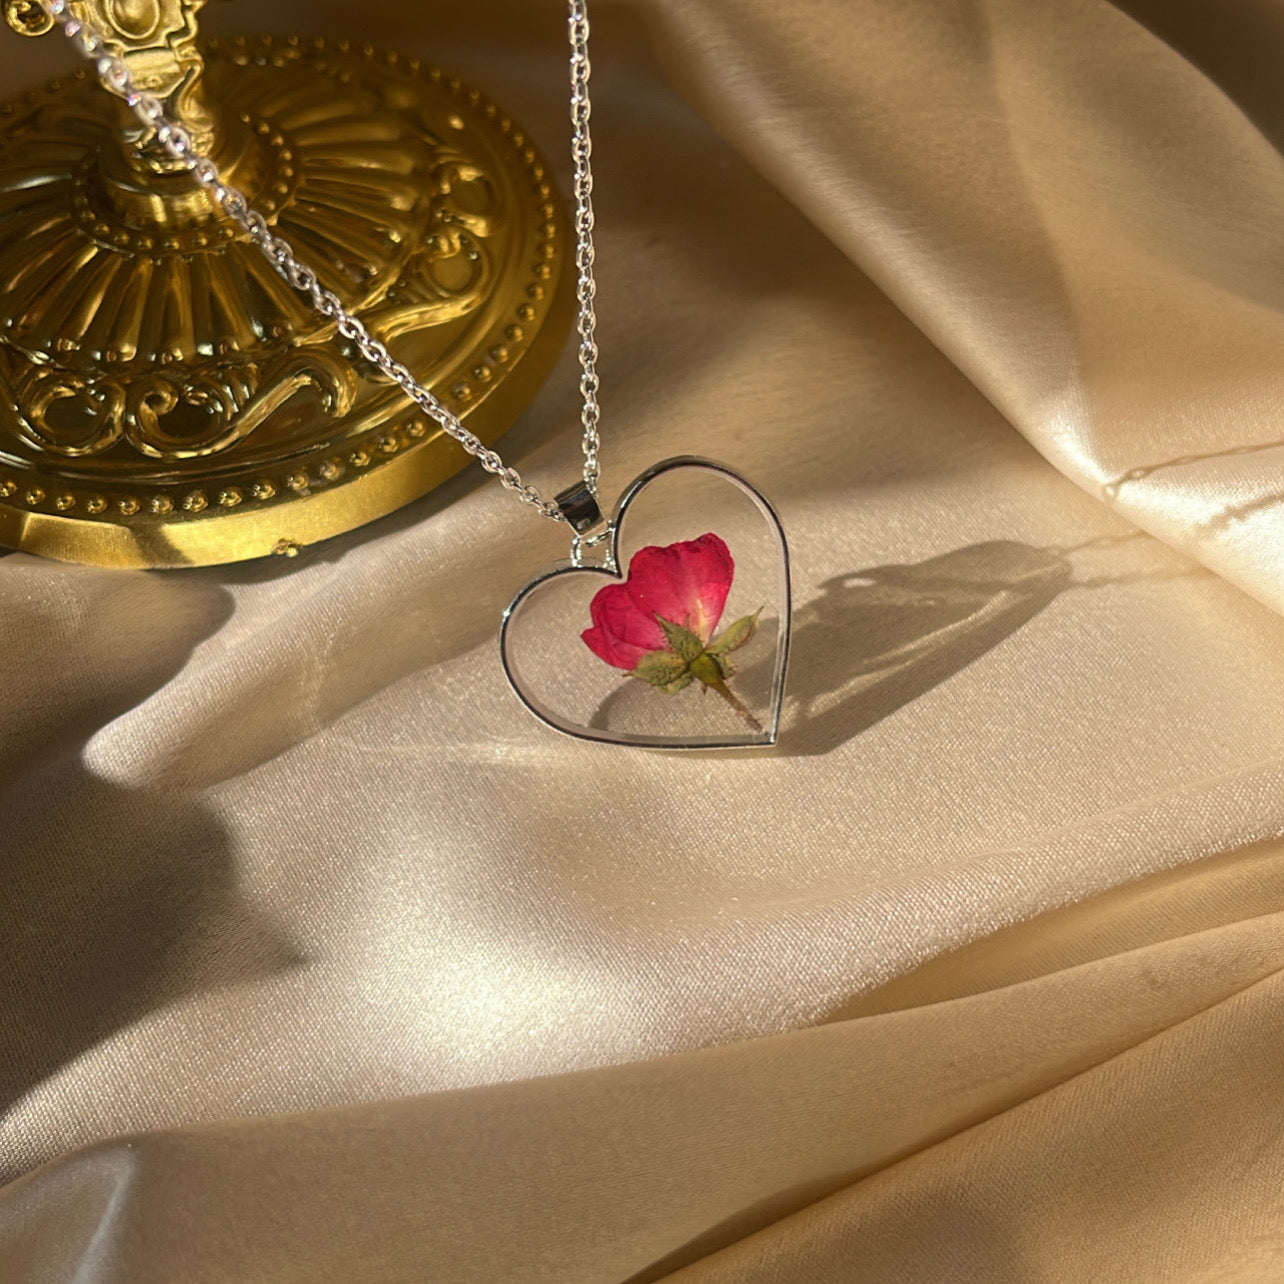 Rosette Silver Pendant | Real Preserved Rose Pendant - Ladywithcraft